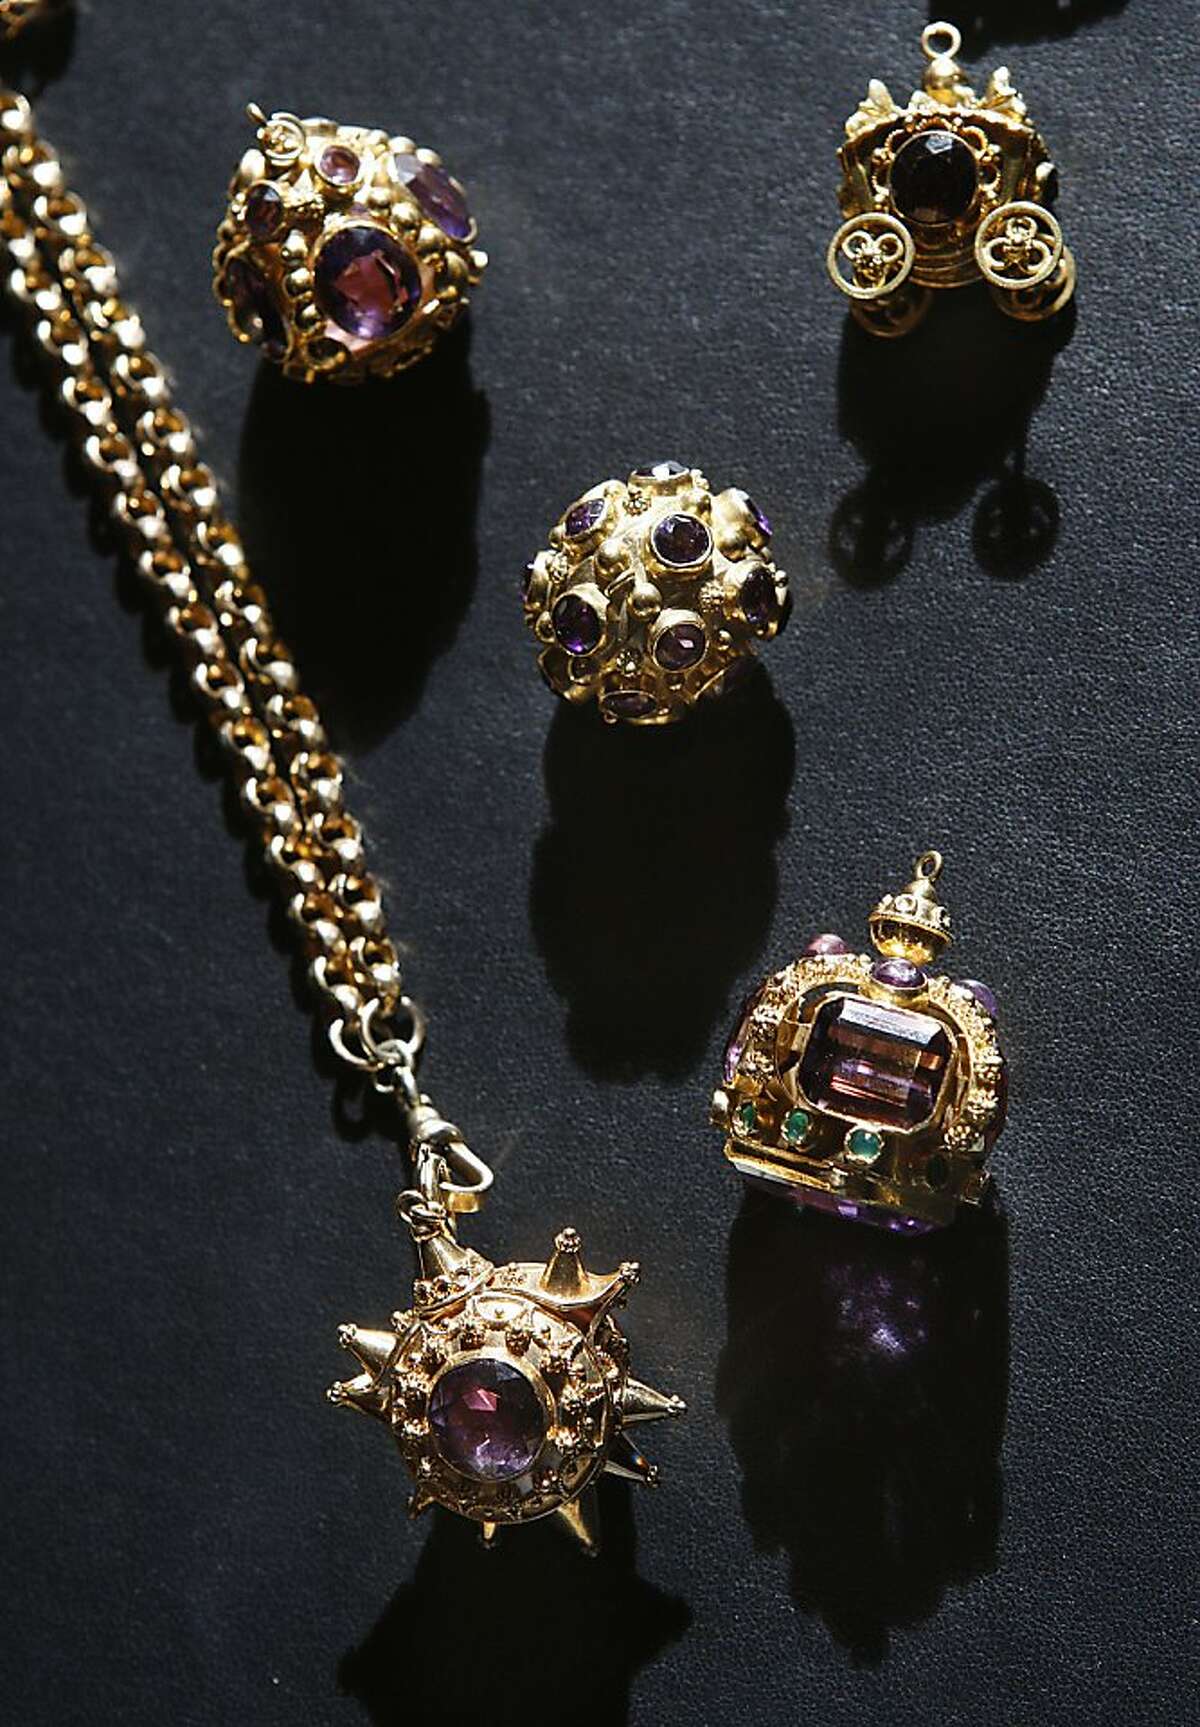 Charms displayed at Meriwether in San Francisco, California, on Wednesday, December 12, 2012.